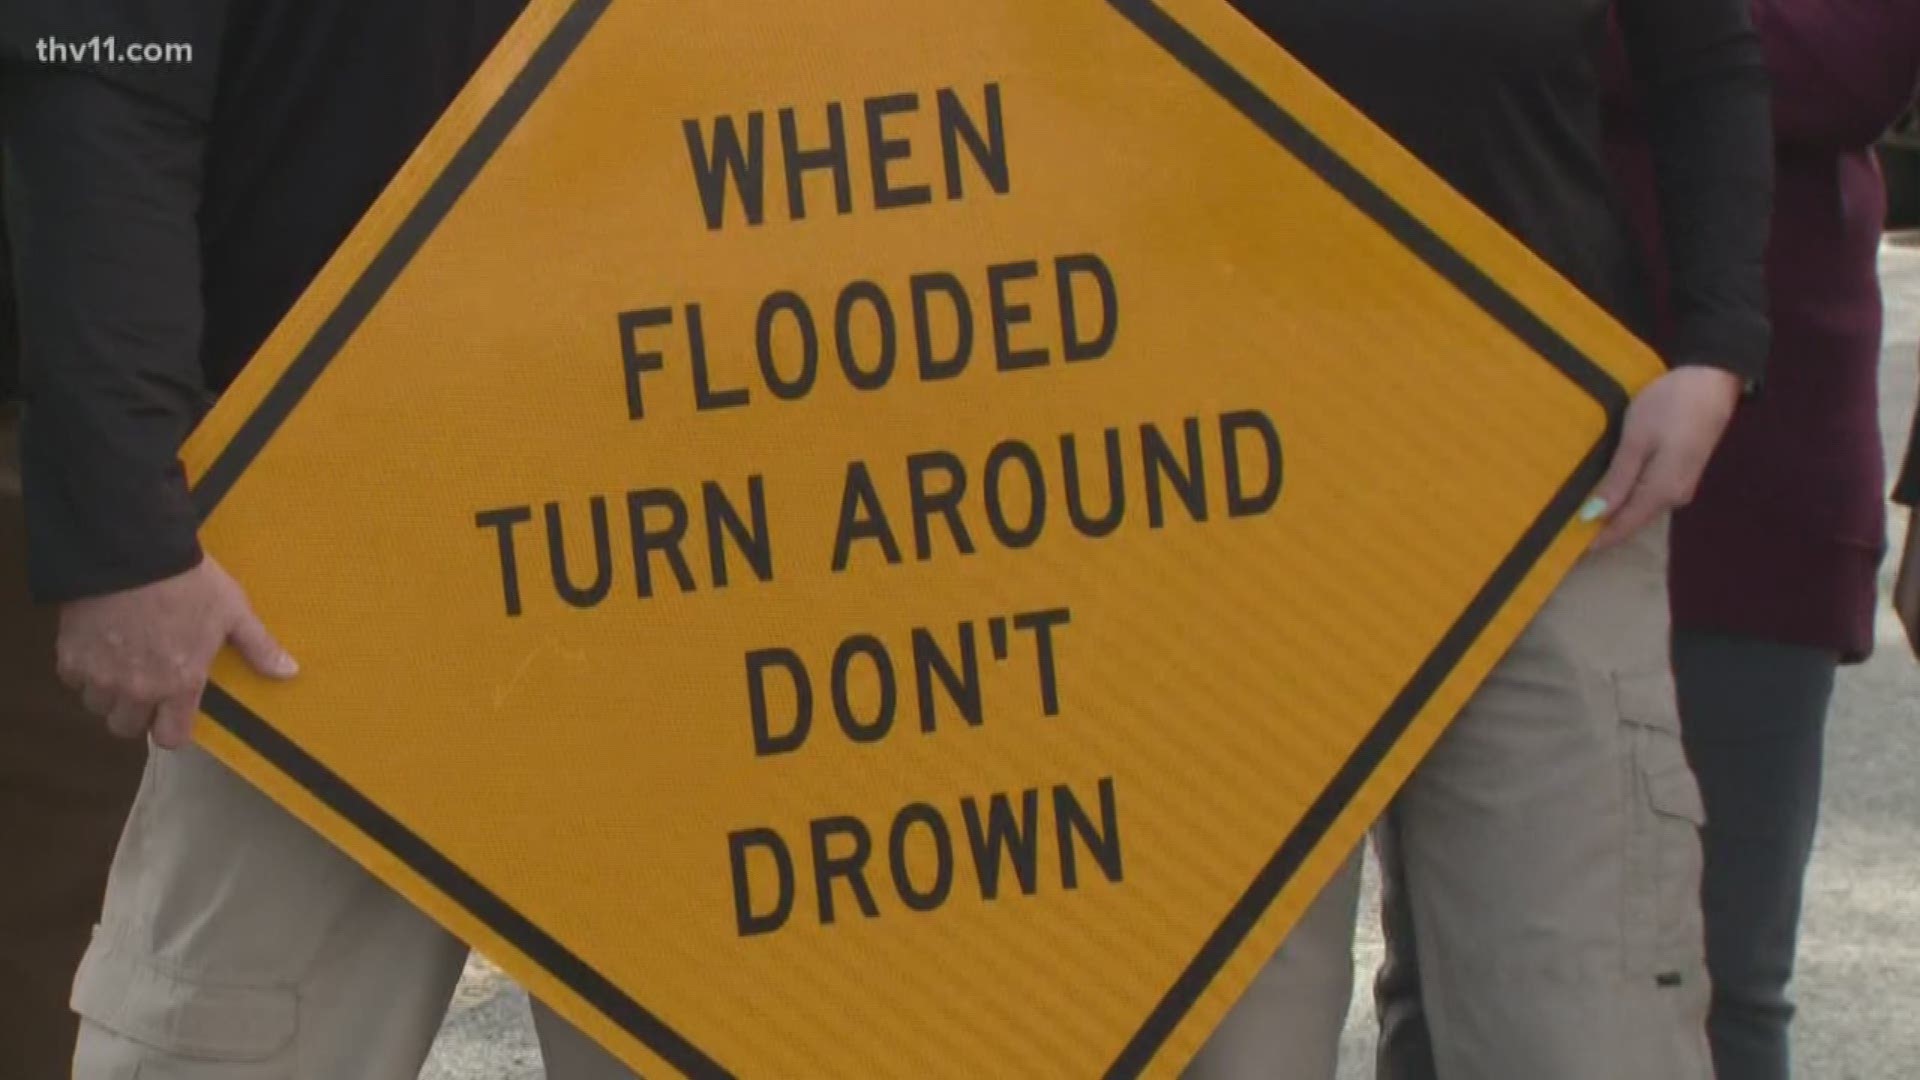 'Turn around, don't drown' signs installed in Faulkner County.